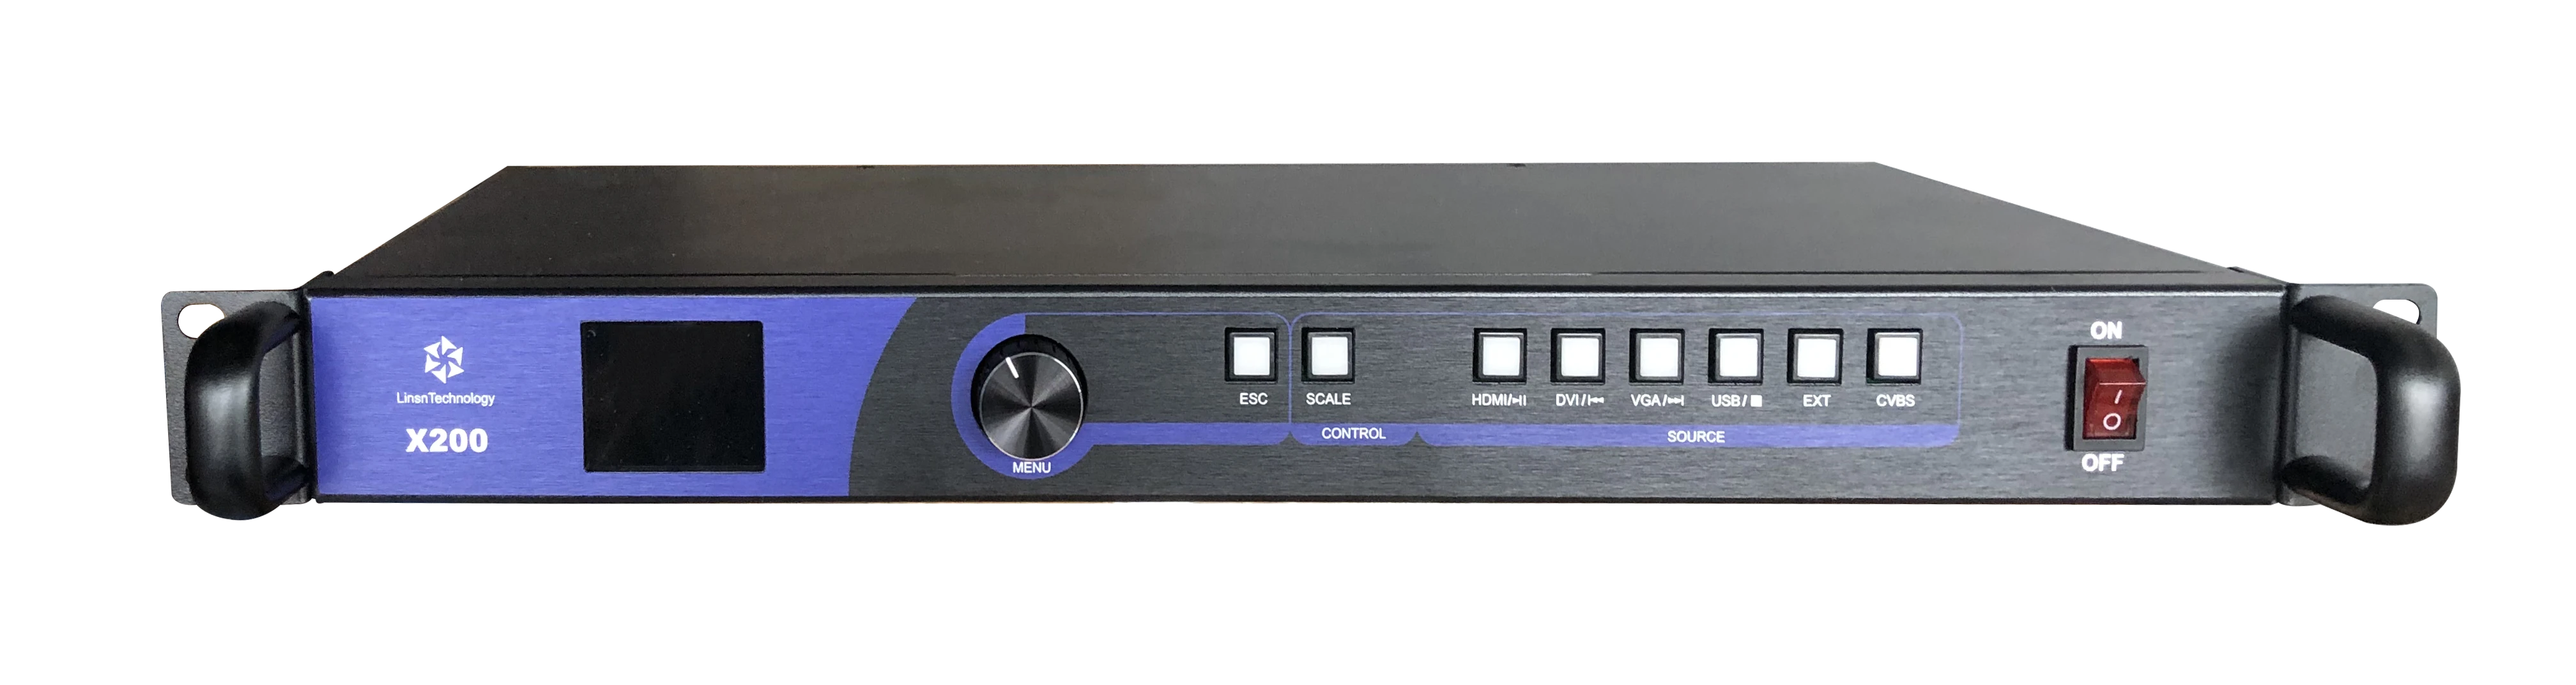 Linsn X200 Video Processor + Sender with 2.3  Million Pixels-All in to One Controller - Super Smart feature of USB - Plug & Play